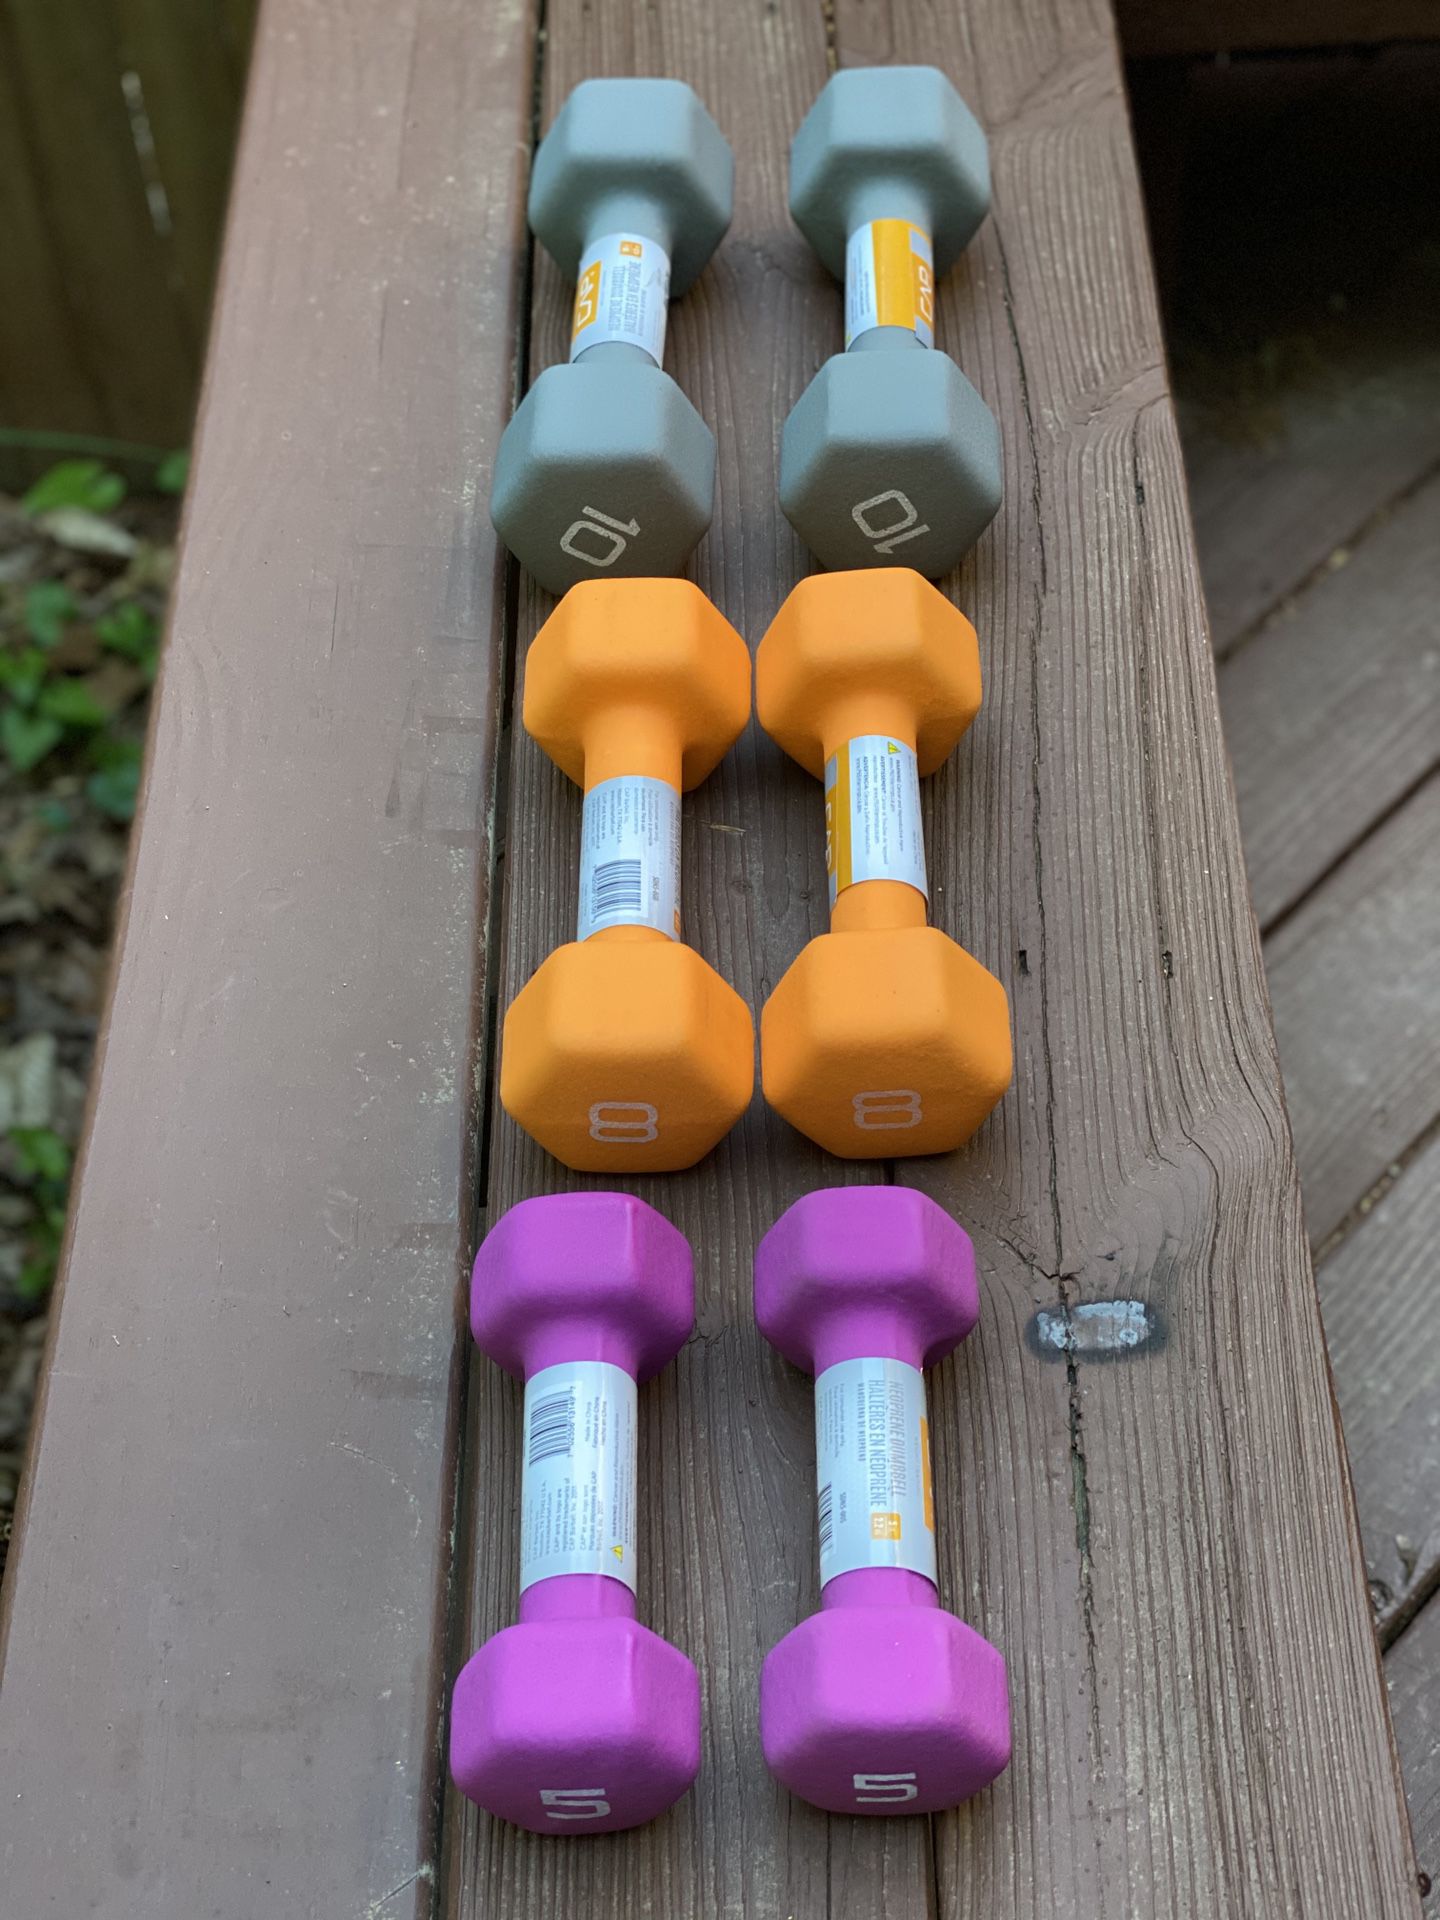 3 pairs of dumbbells (5s, 8s, 10s) BRAND NEW Compare with Bowflex